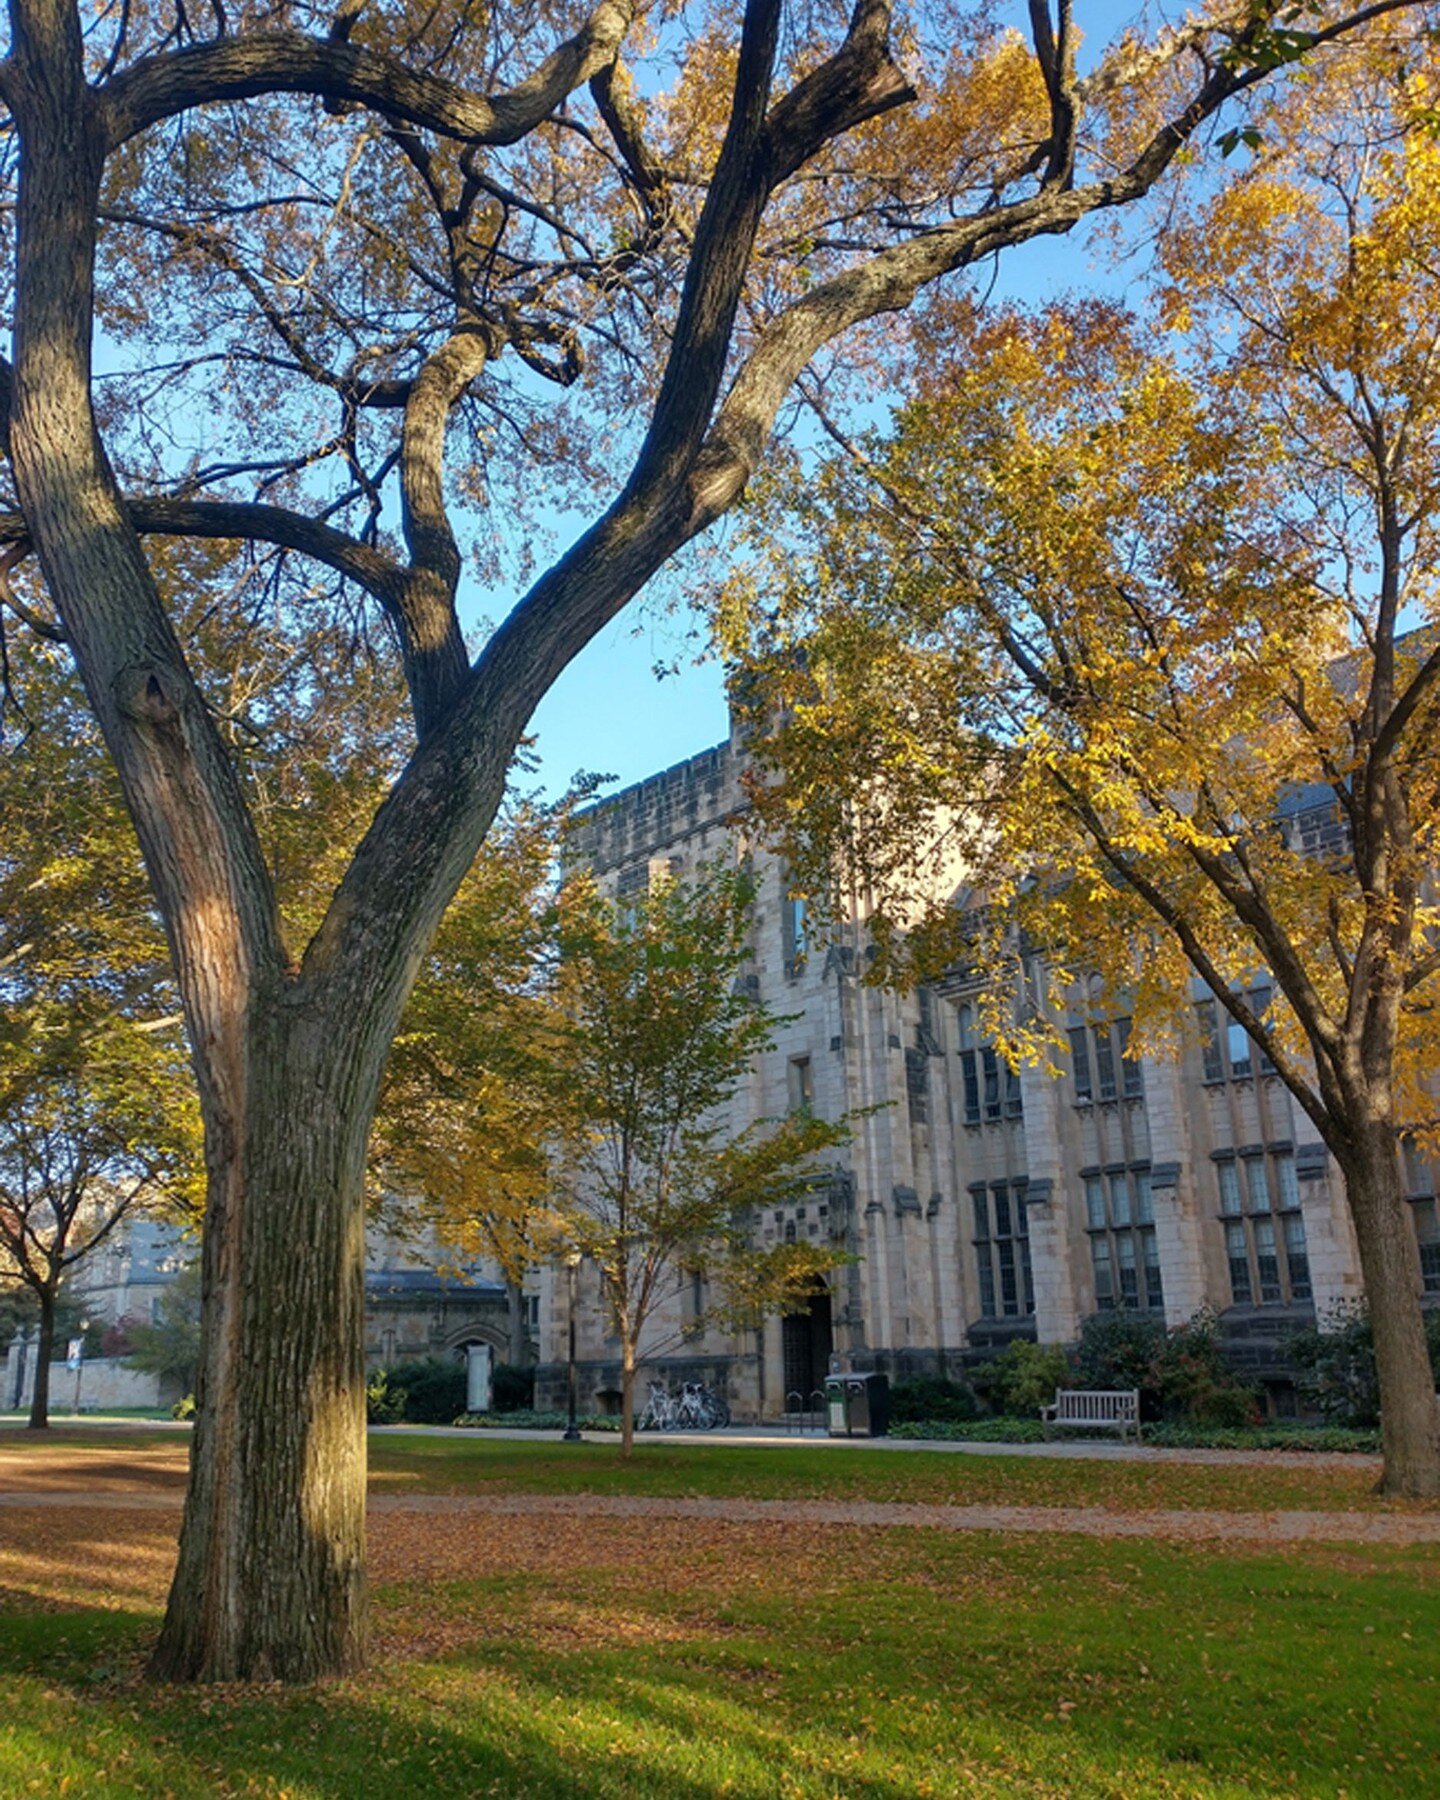 Some shots from Yale University campus and my trip to New Haven, CT.

Click the link in my bio for my article all about visiting New Haven, including where to eat, where to stay, and what to do!

#connecticut #ct #ctvisit #newhaven #newhavenct #yale 